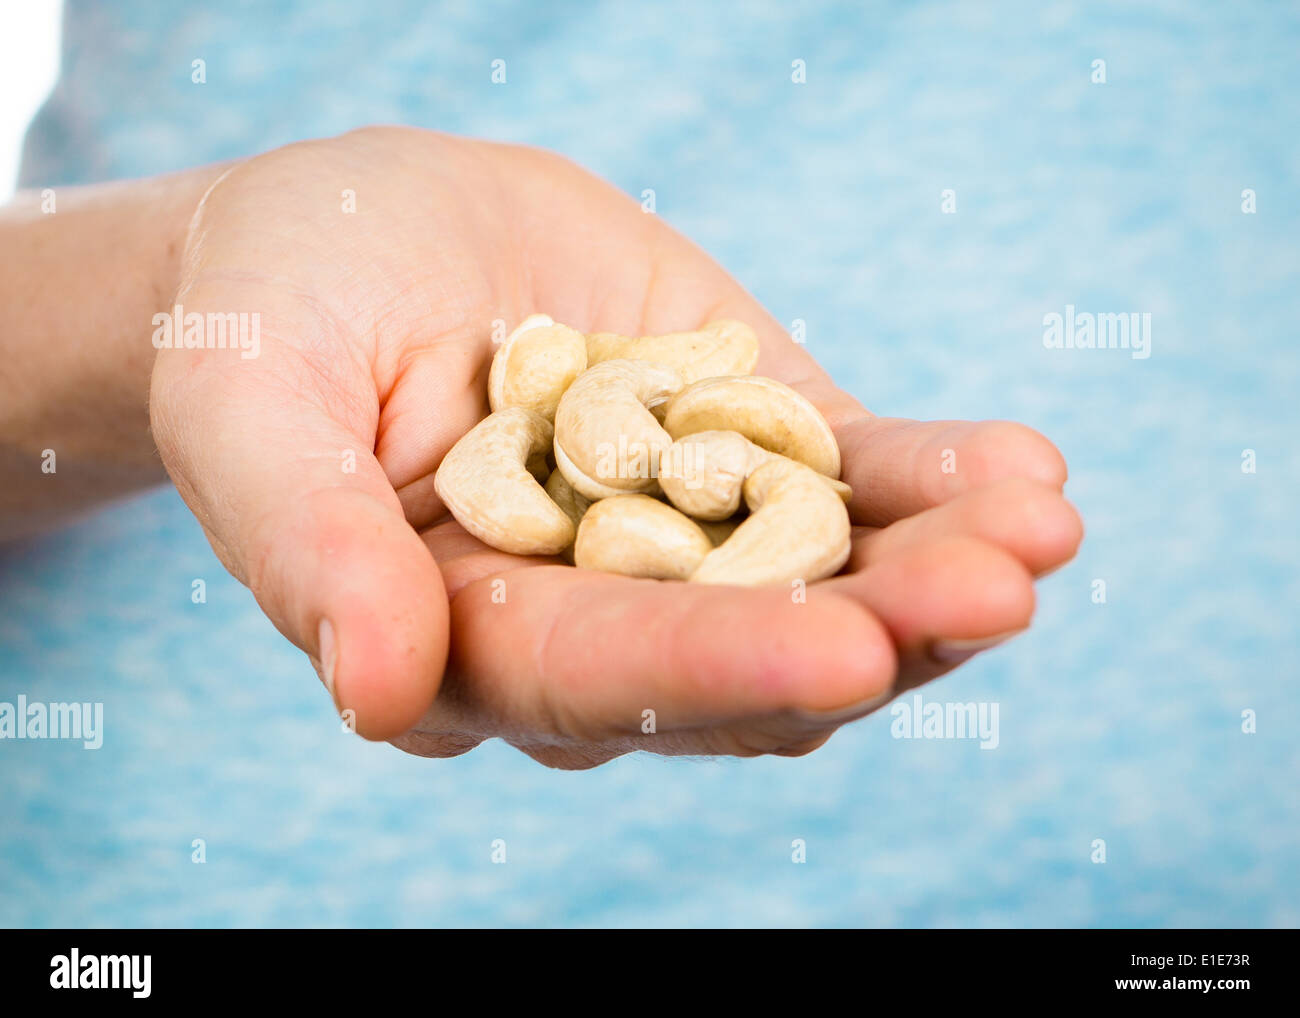 Hand holding a heap of organic cashew nuts Stock Photo